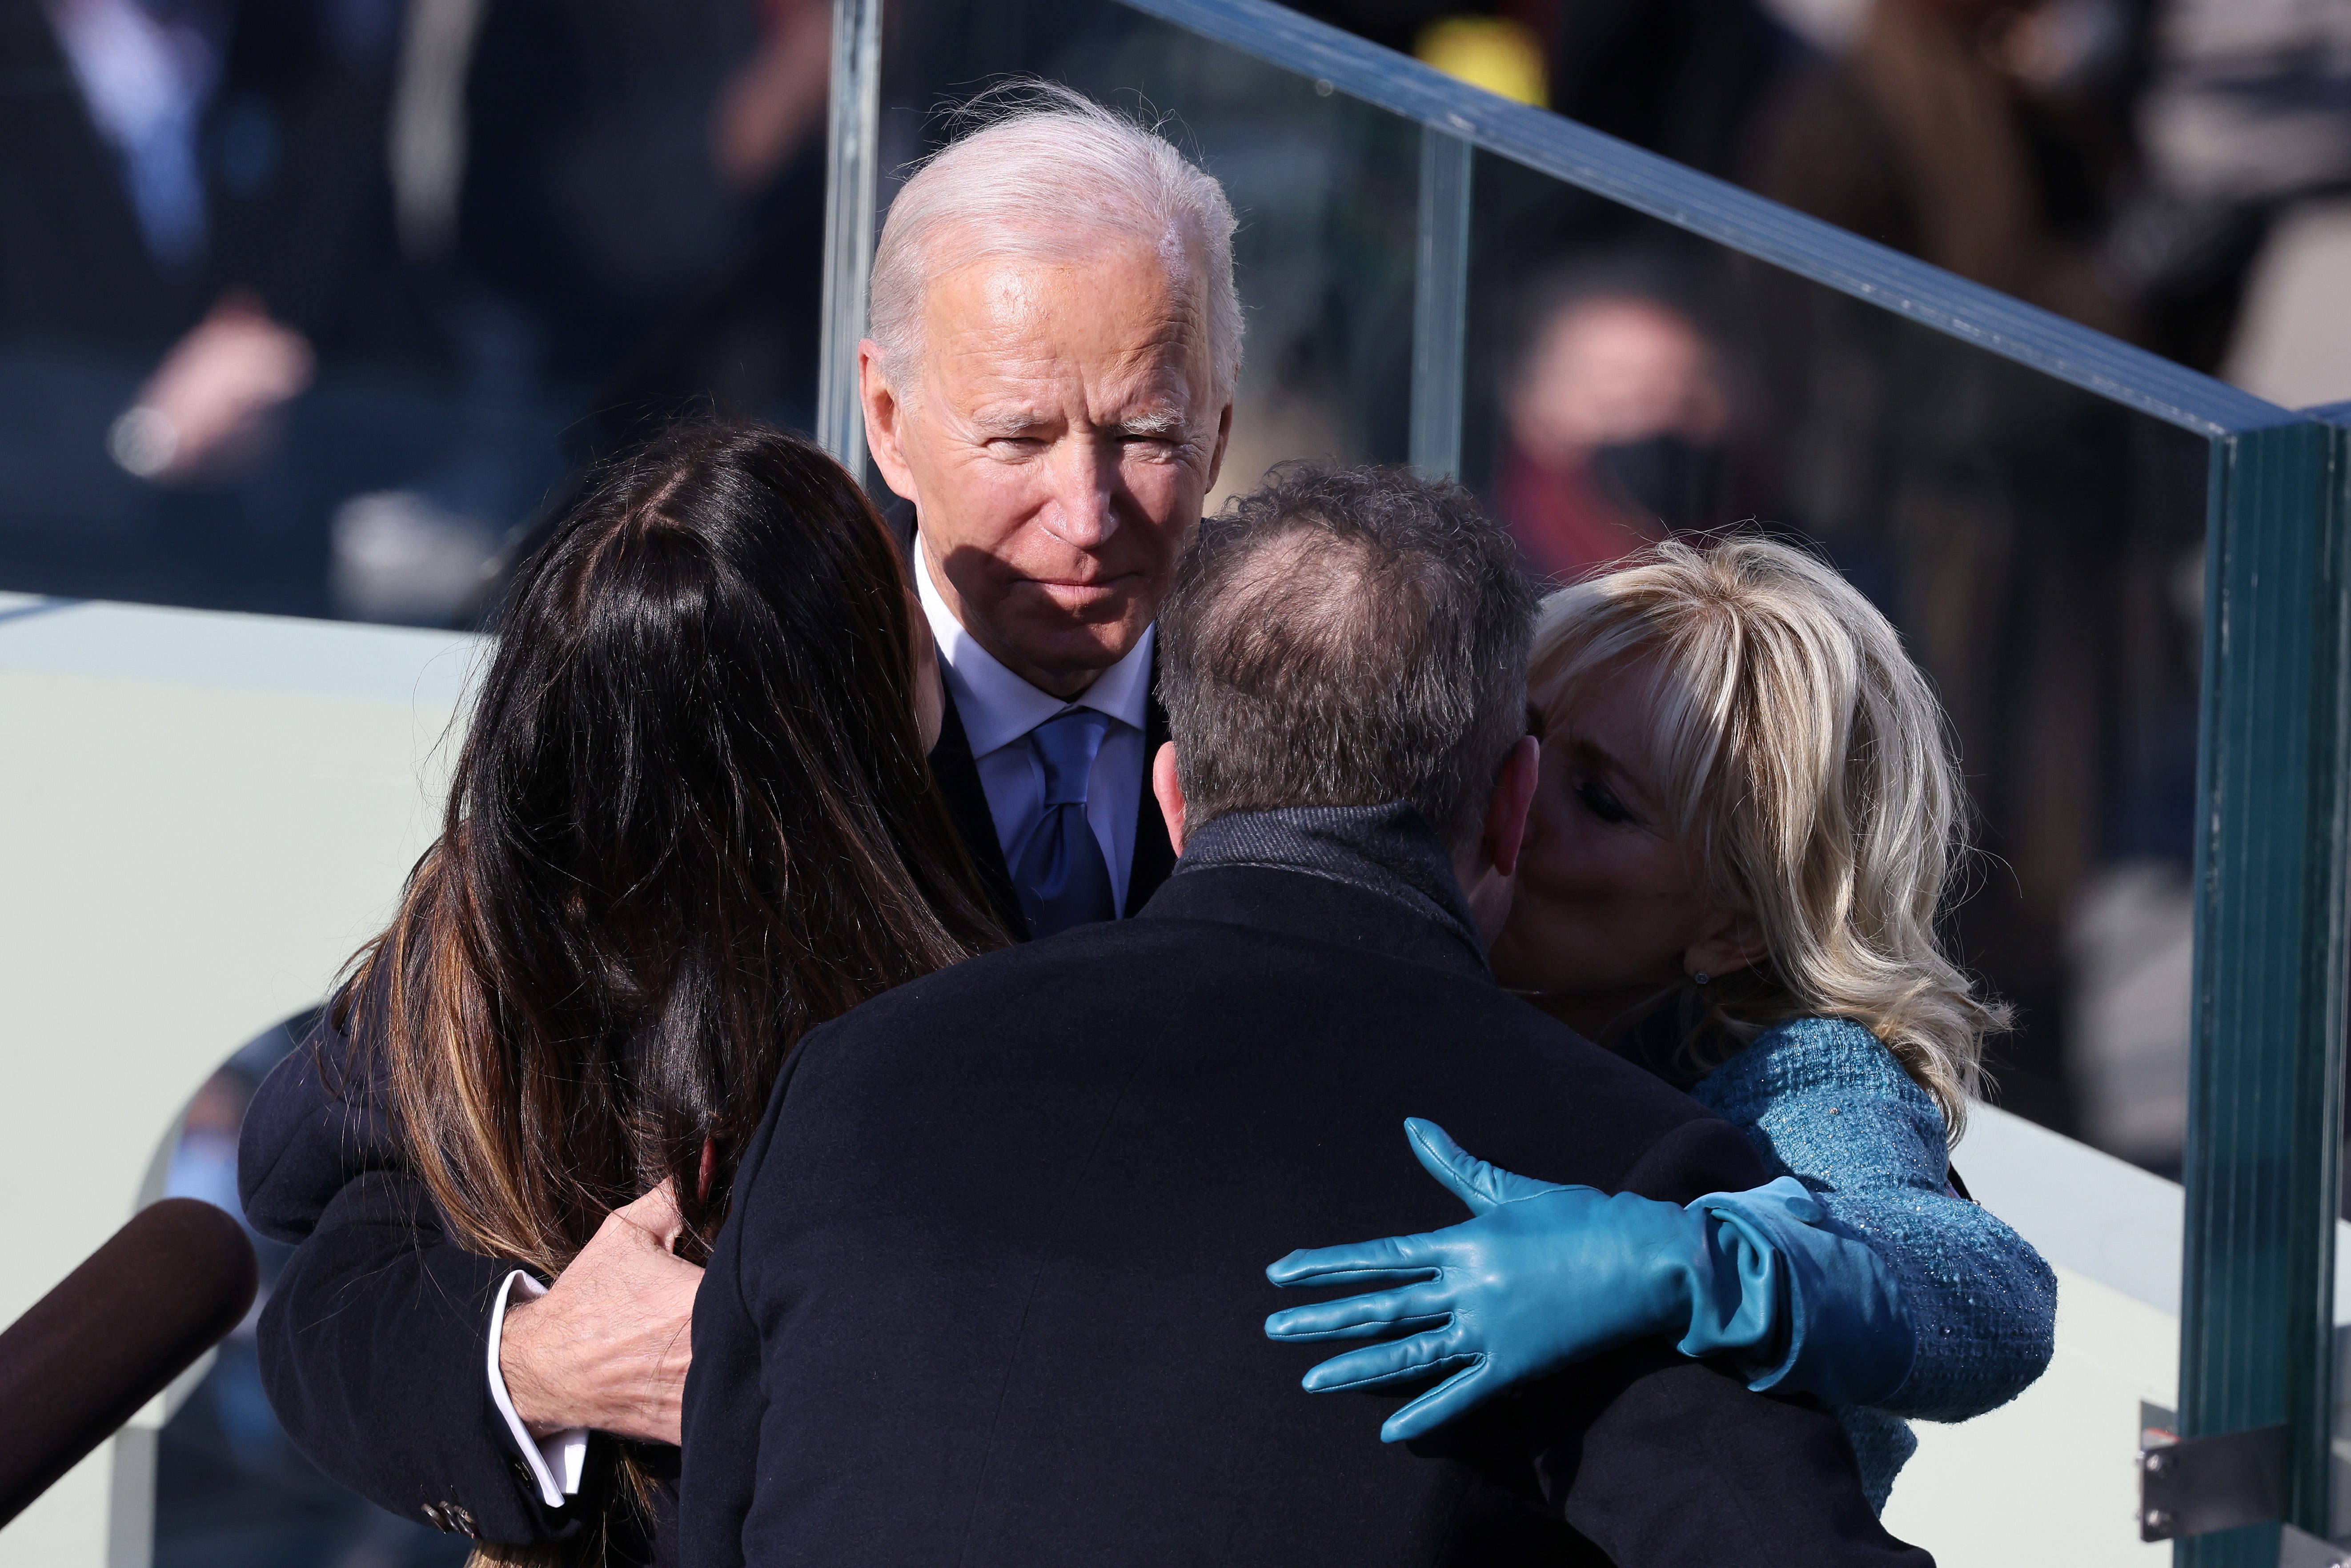 Delaware's own Joe Biden drops out of Presidential race, citing 'best interest' of country